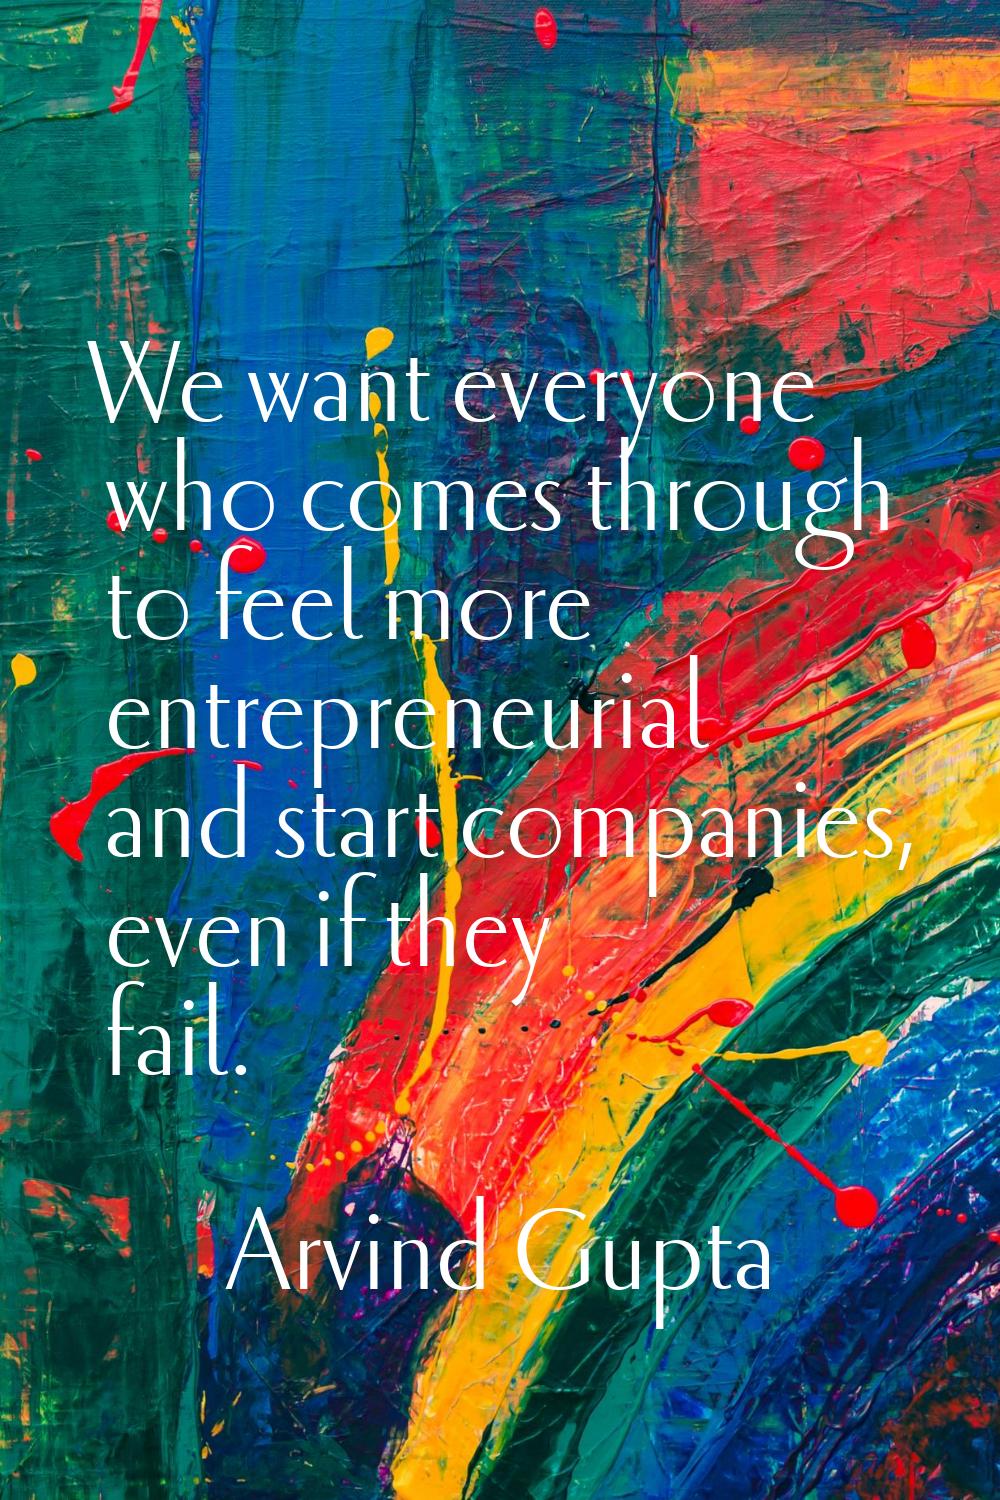 We want everyone who comes through to feel more entrepreneurial and start companies, even if they f